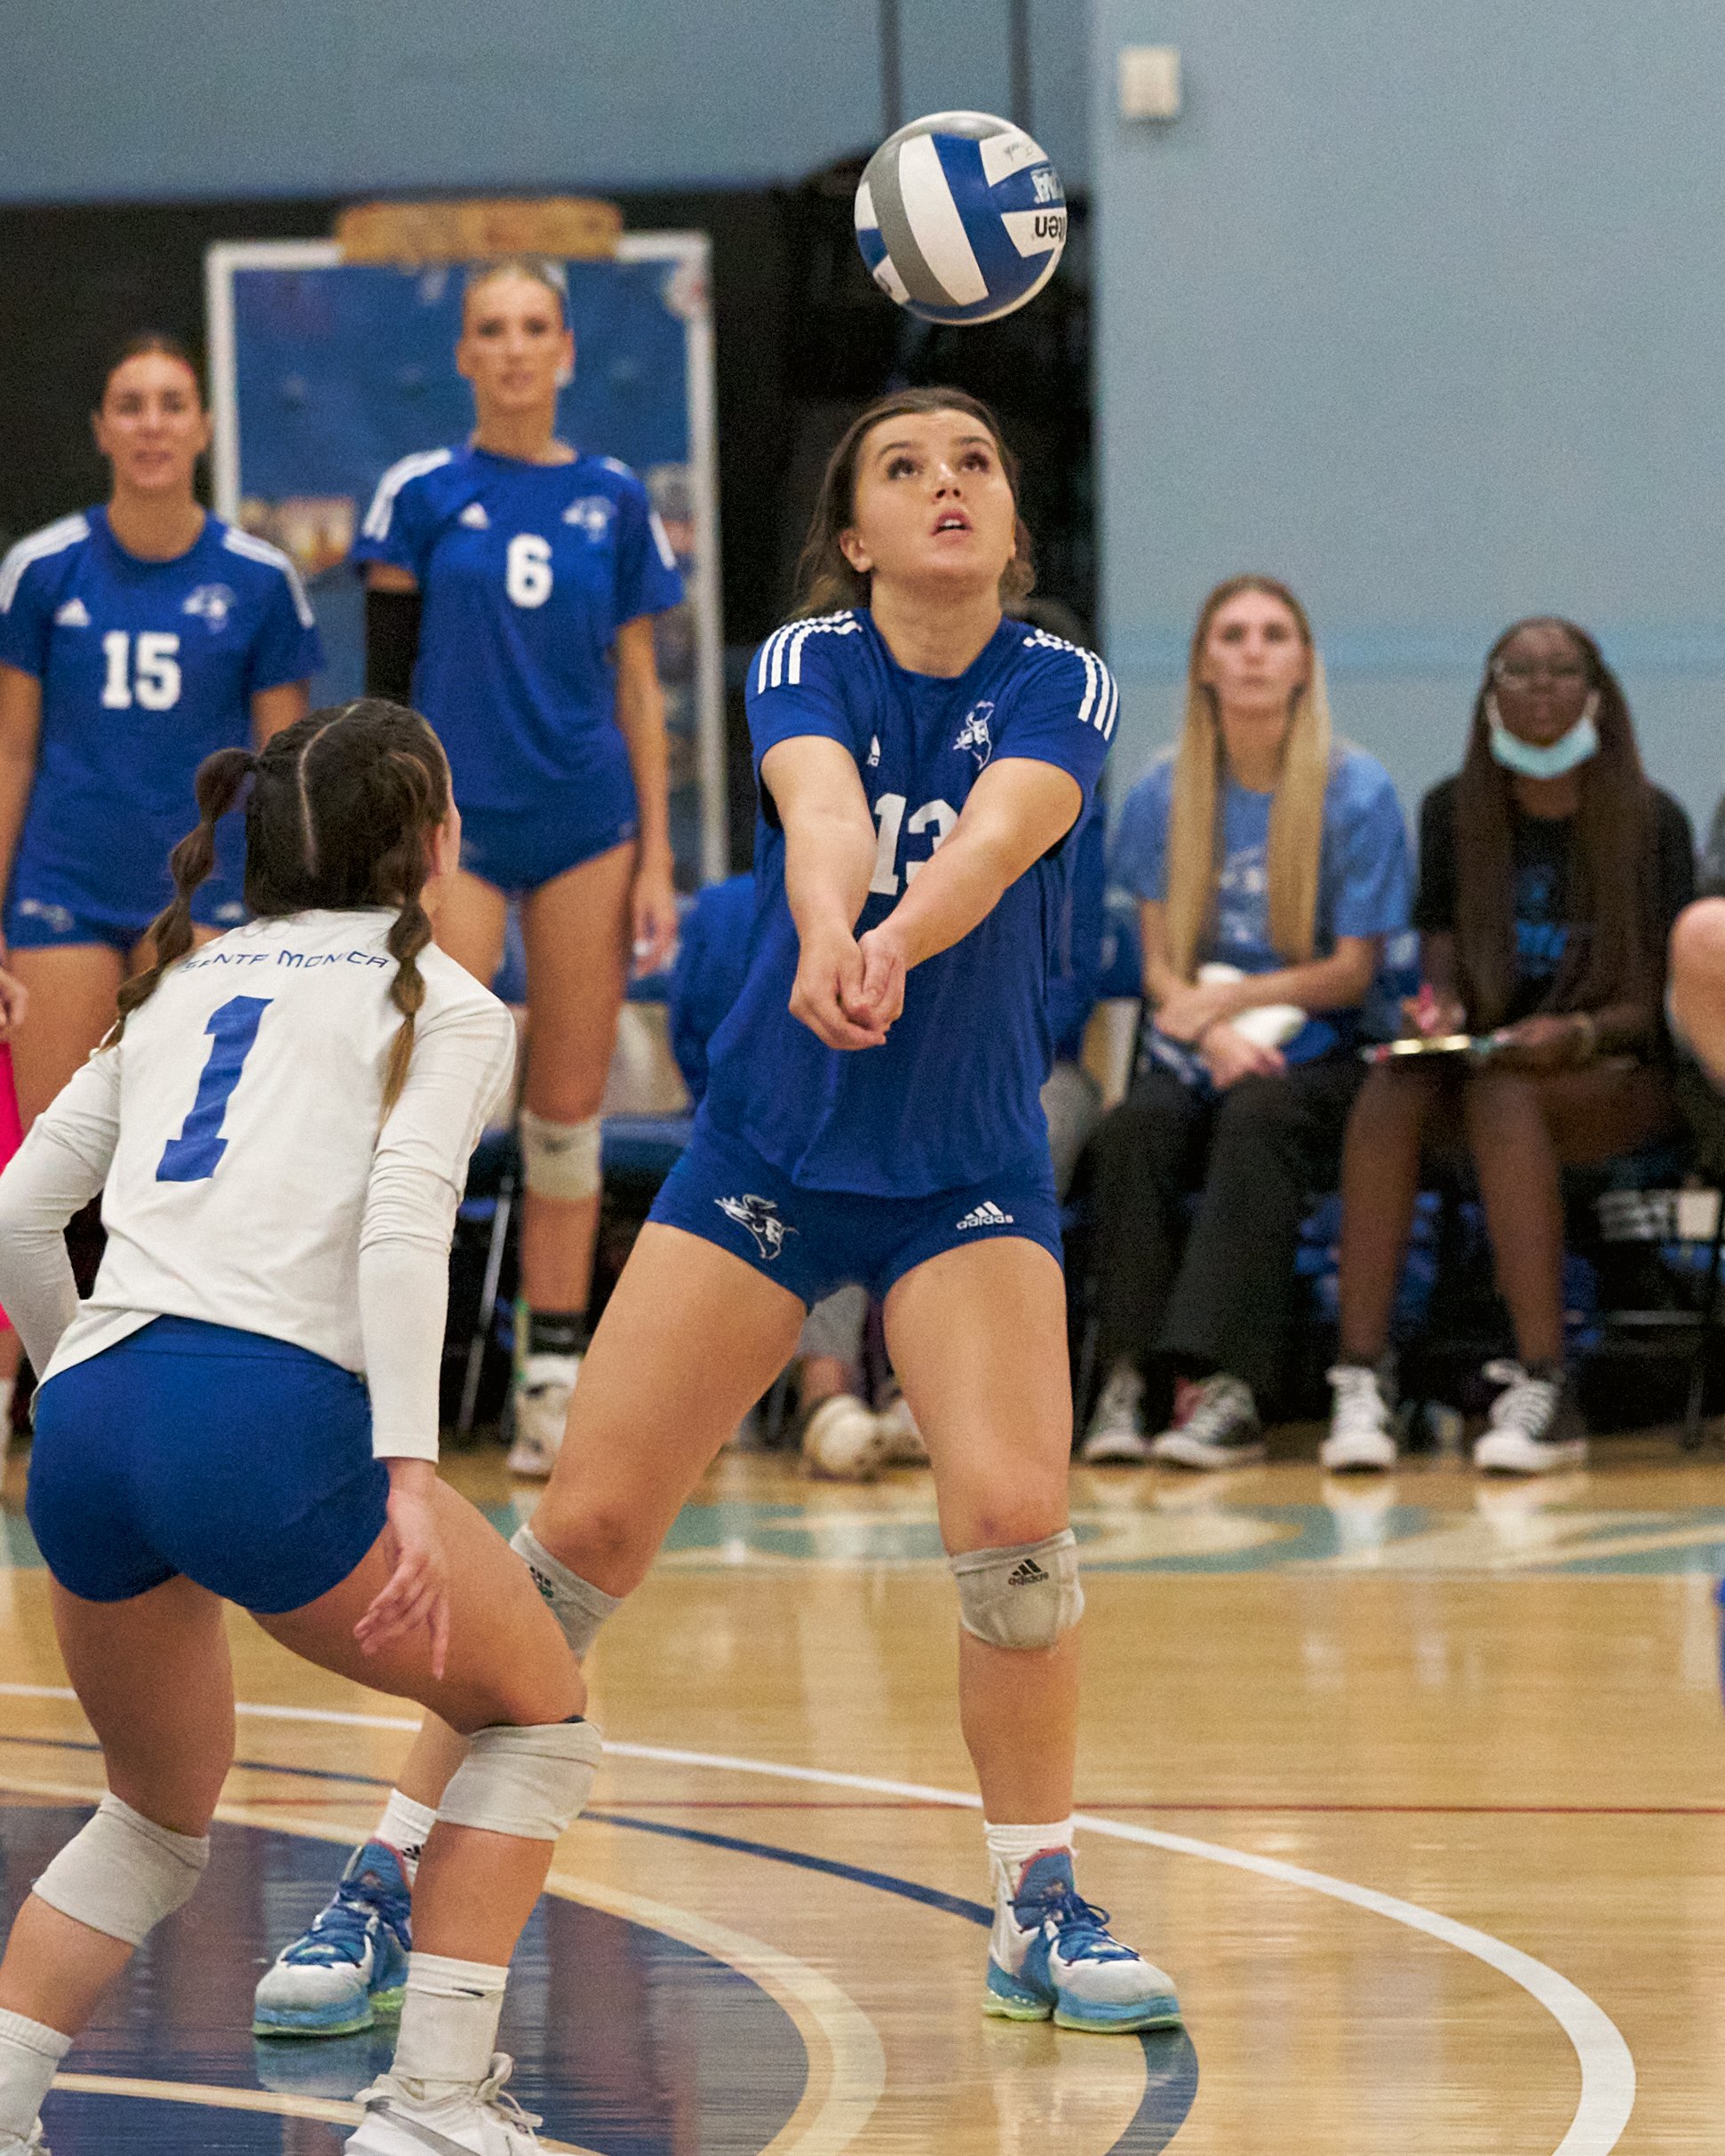  Santa Monica College Corsairs' Mackenzie Wolff bumps the ball during the women's volleyball match against the College of the Canyons Cougars on Friday, Oct. 28, 2022, at SMC Gym in Santa Monica, Calif. The Corsairs lost 1-3. (Nicholas McCall | The C